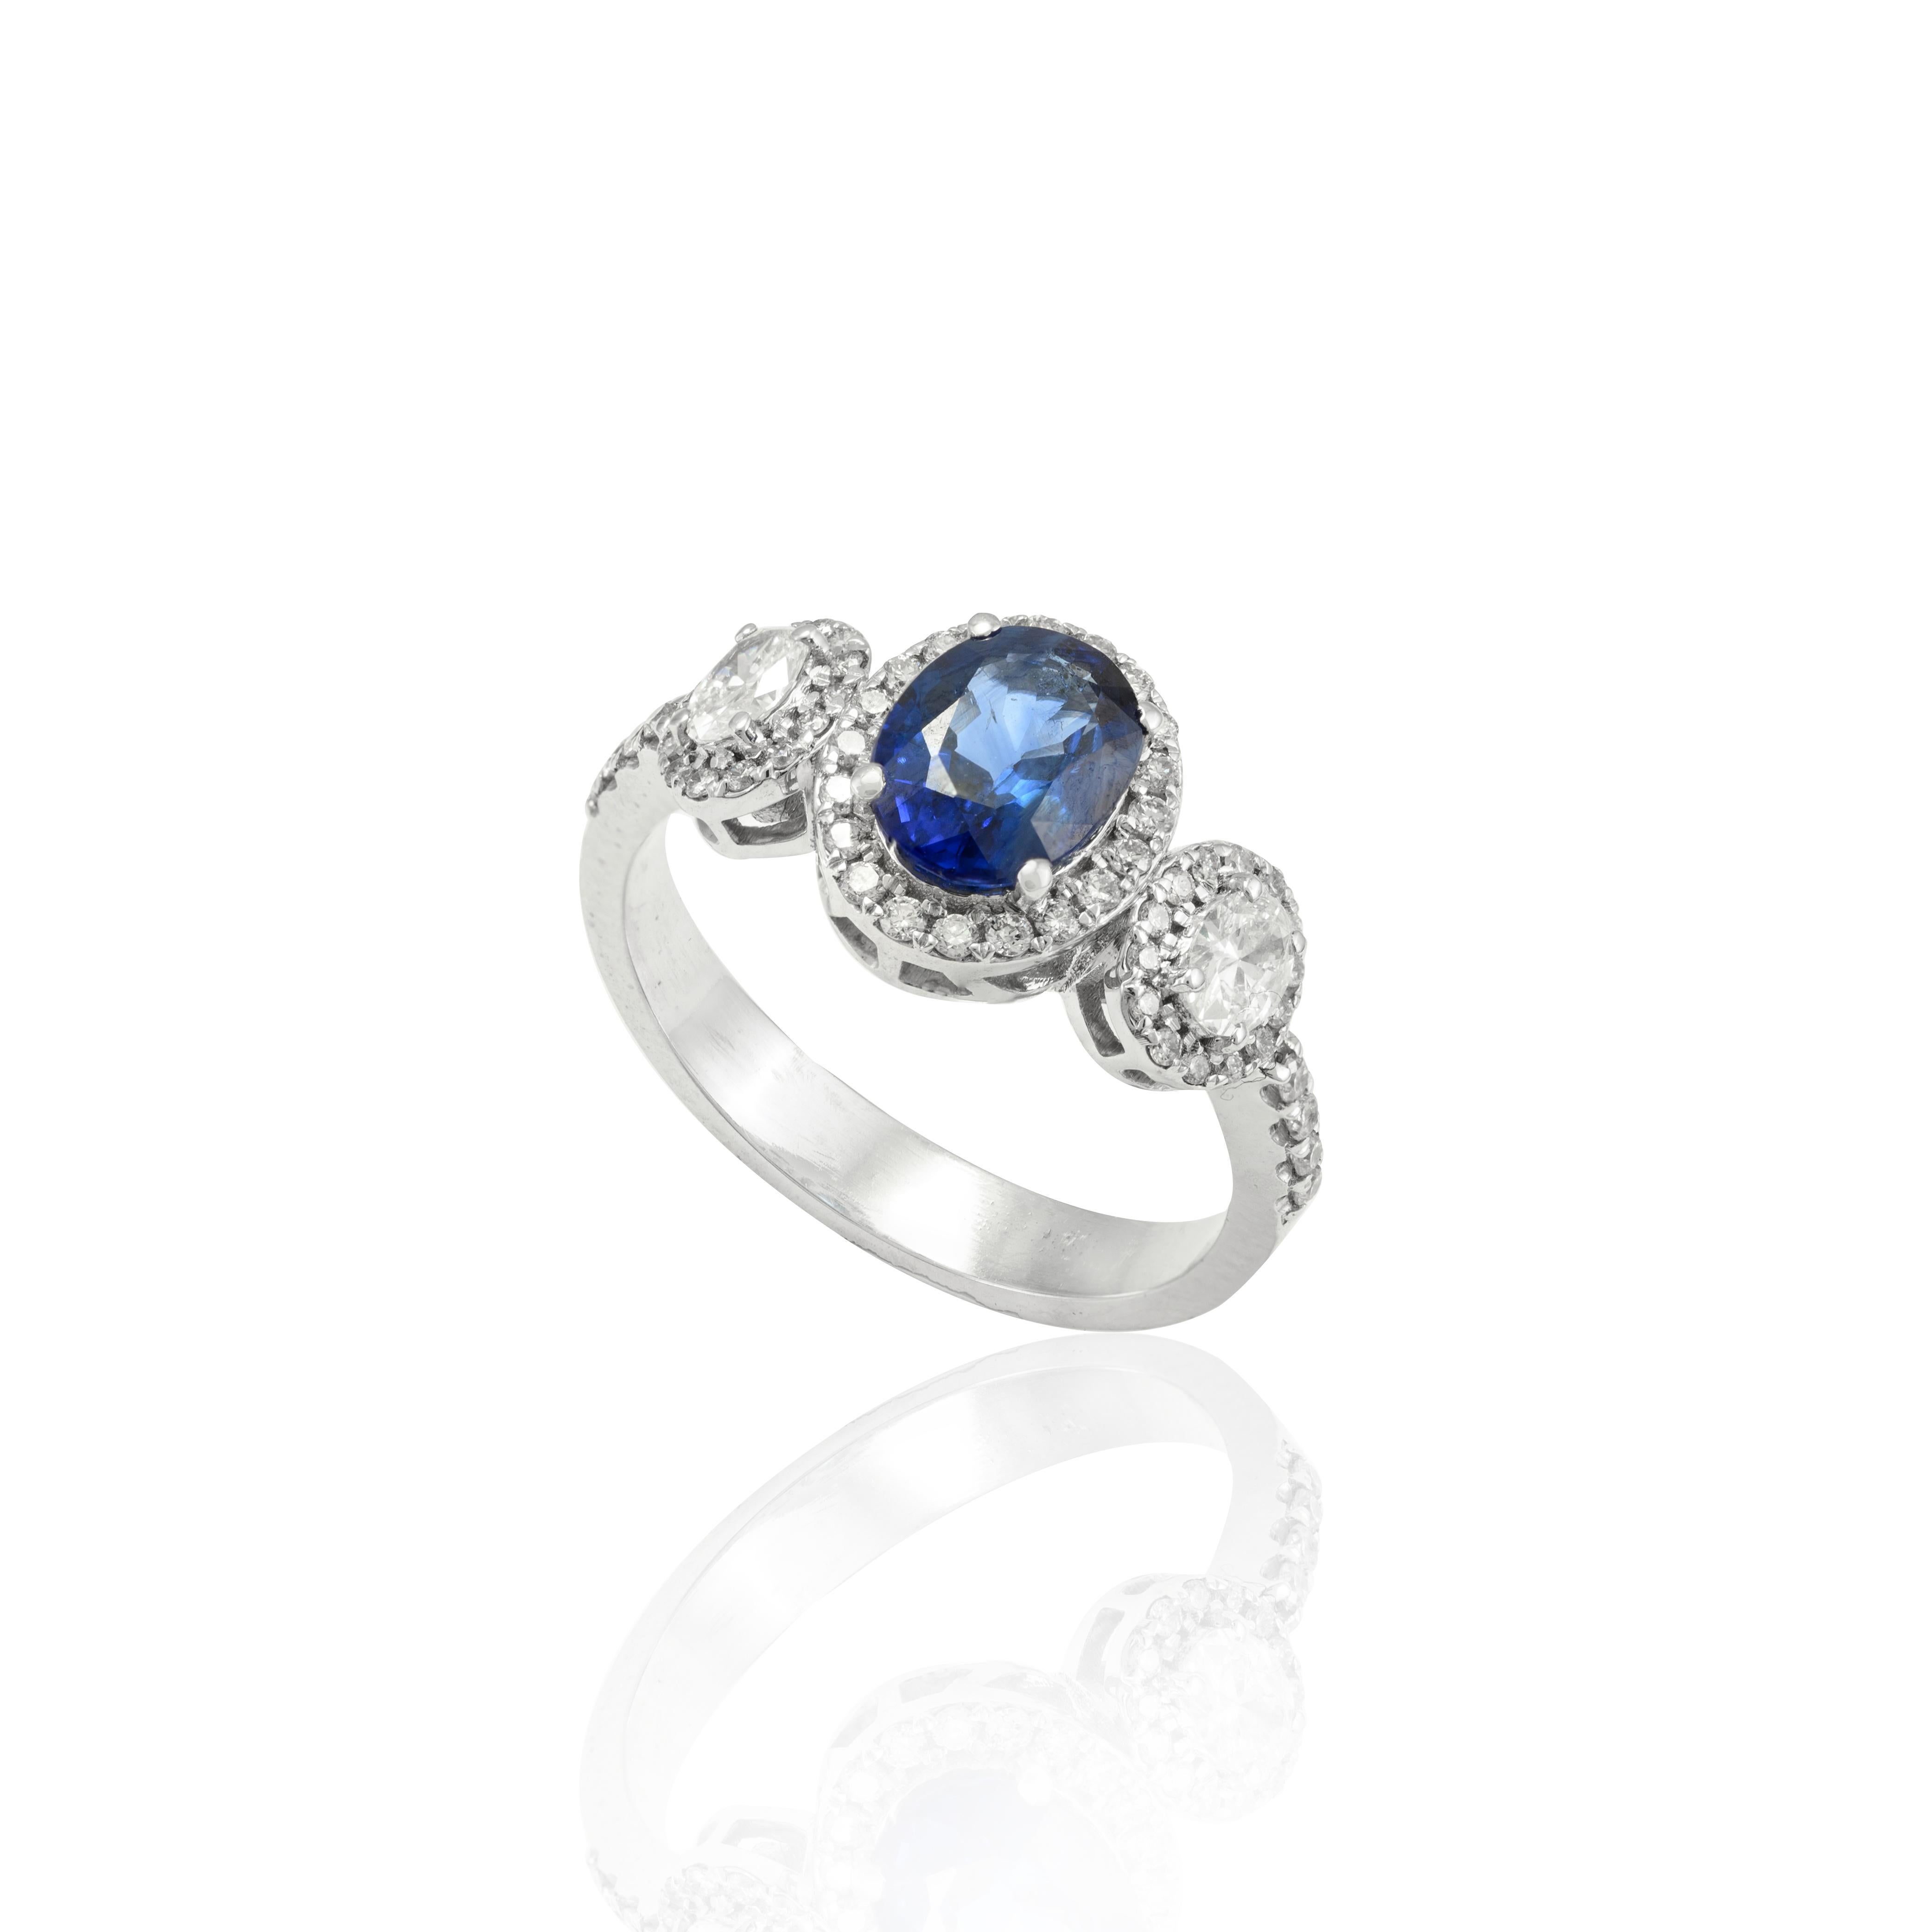 For Sale:  Certified Diamond and Blue Sapphire Three Stone Ring 18k Solid White Gold 5